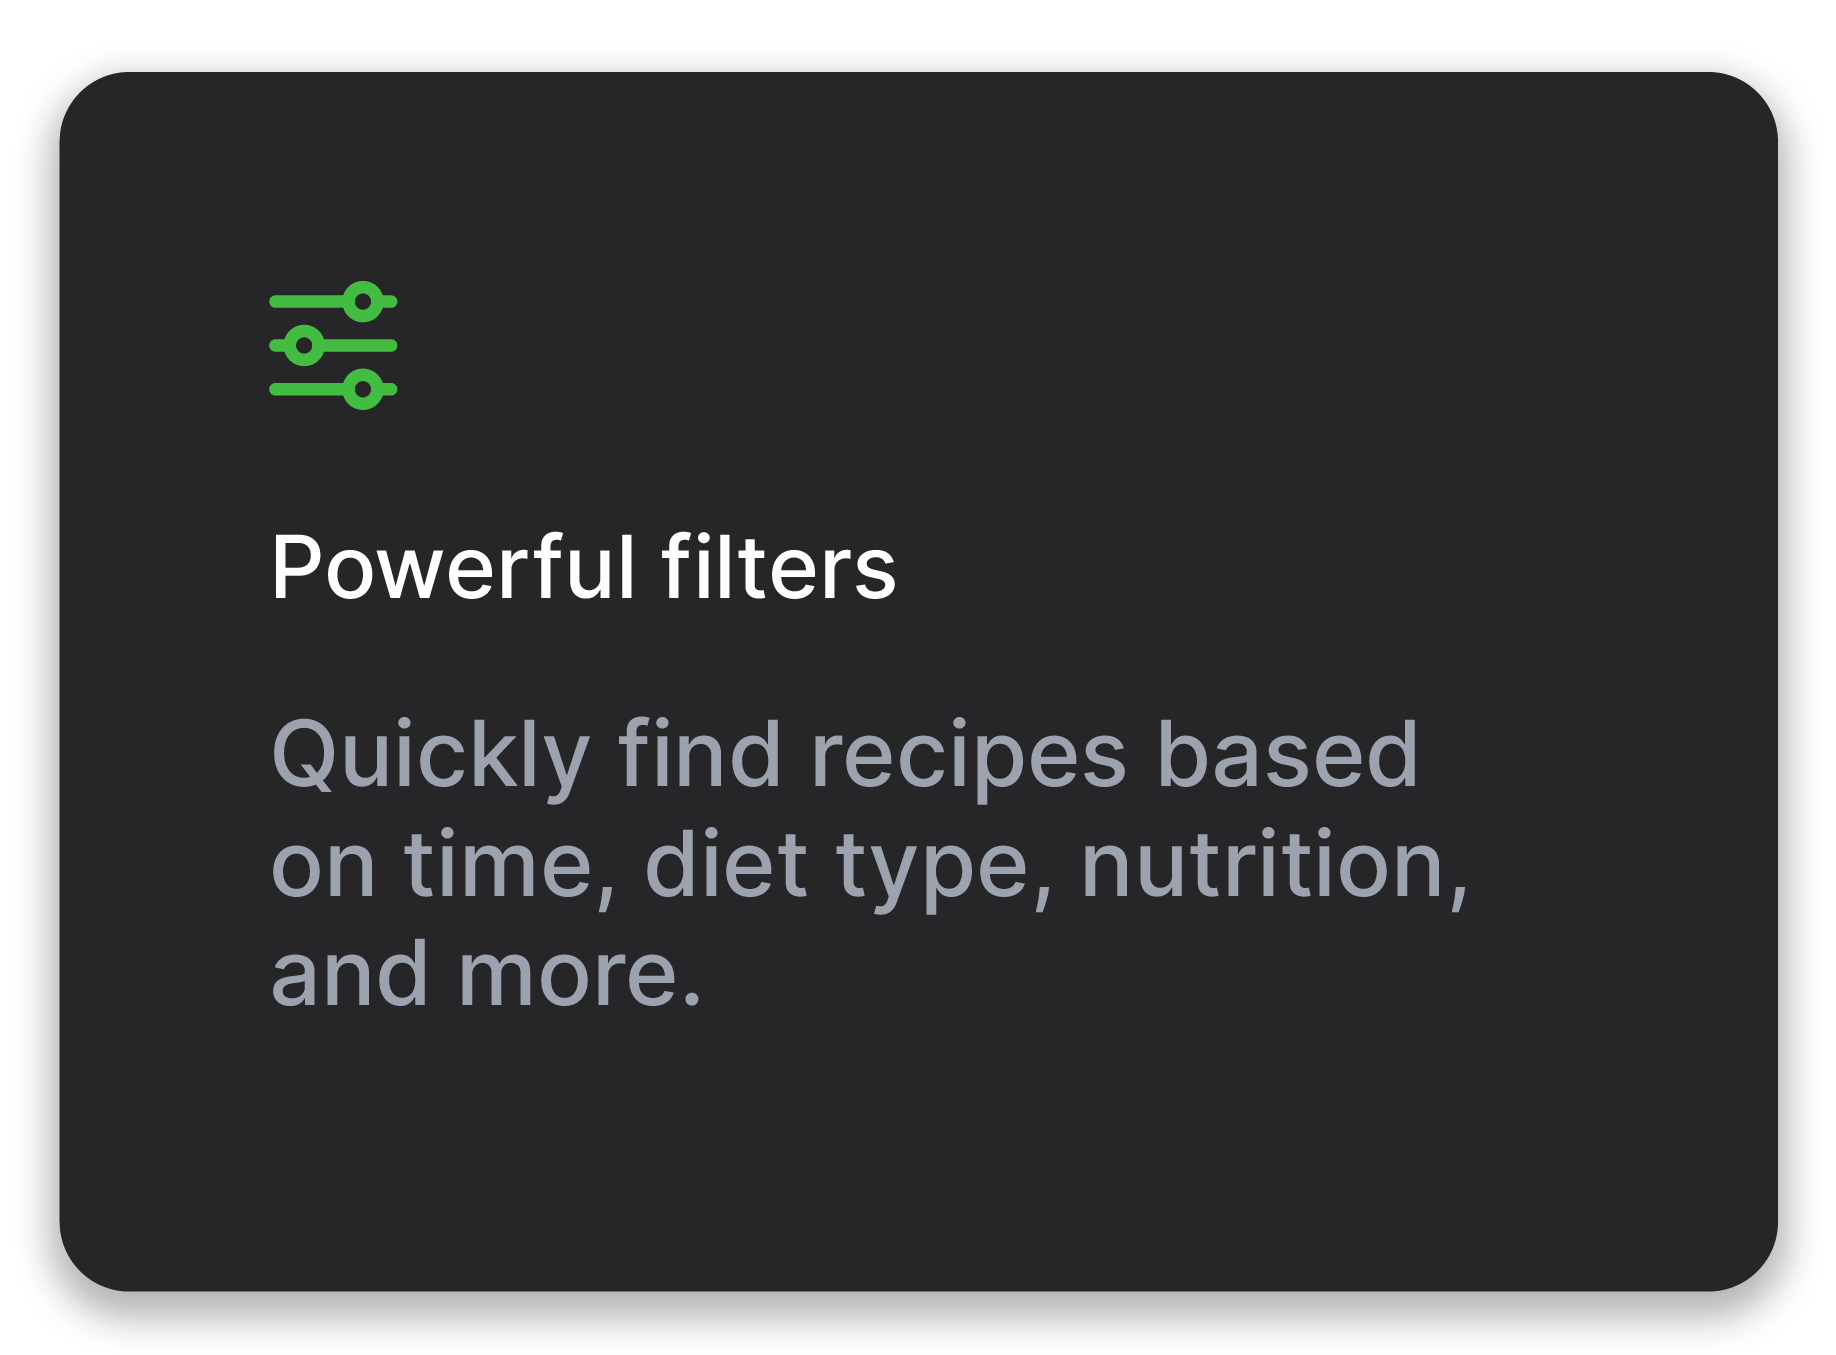 Powerful filters - Quickly find recipes based on time, diet type, nutrition, and more.